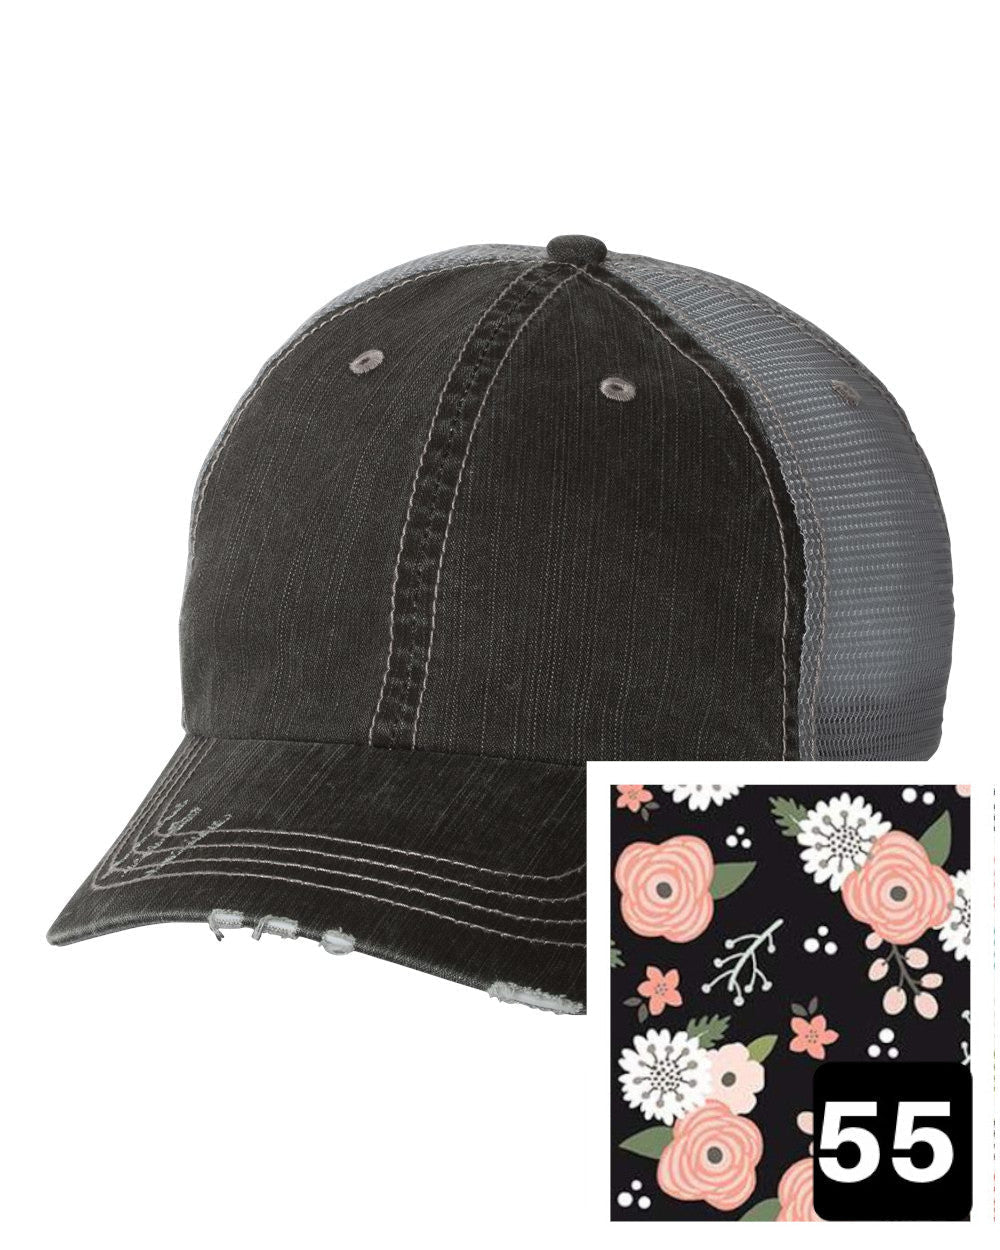 gray distressed trucker hat with petite floral on navy fabric state of Iowa